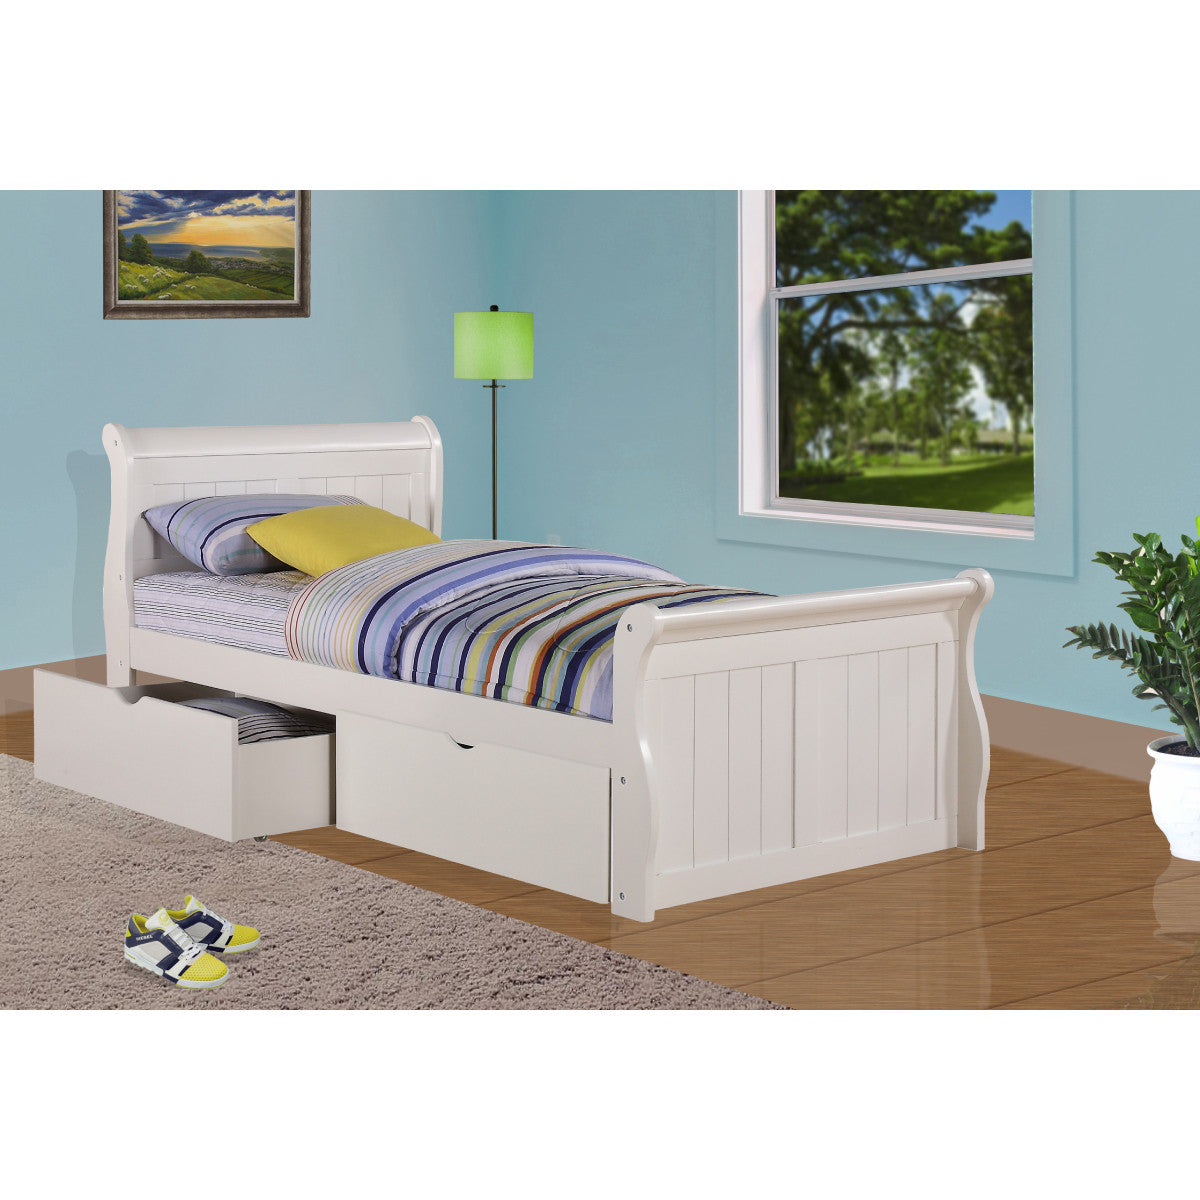 TWIN SLEIGH BED WITH DUAL UNDERBED DRAWERS WHITE FINISH